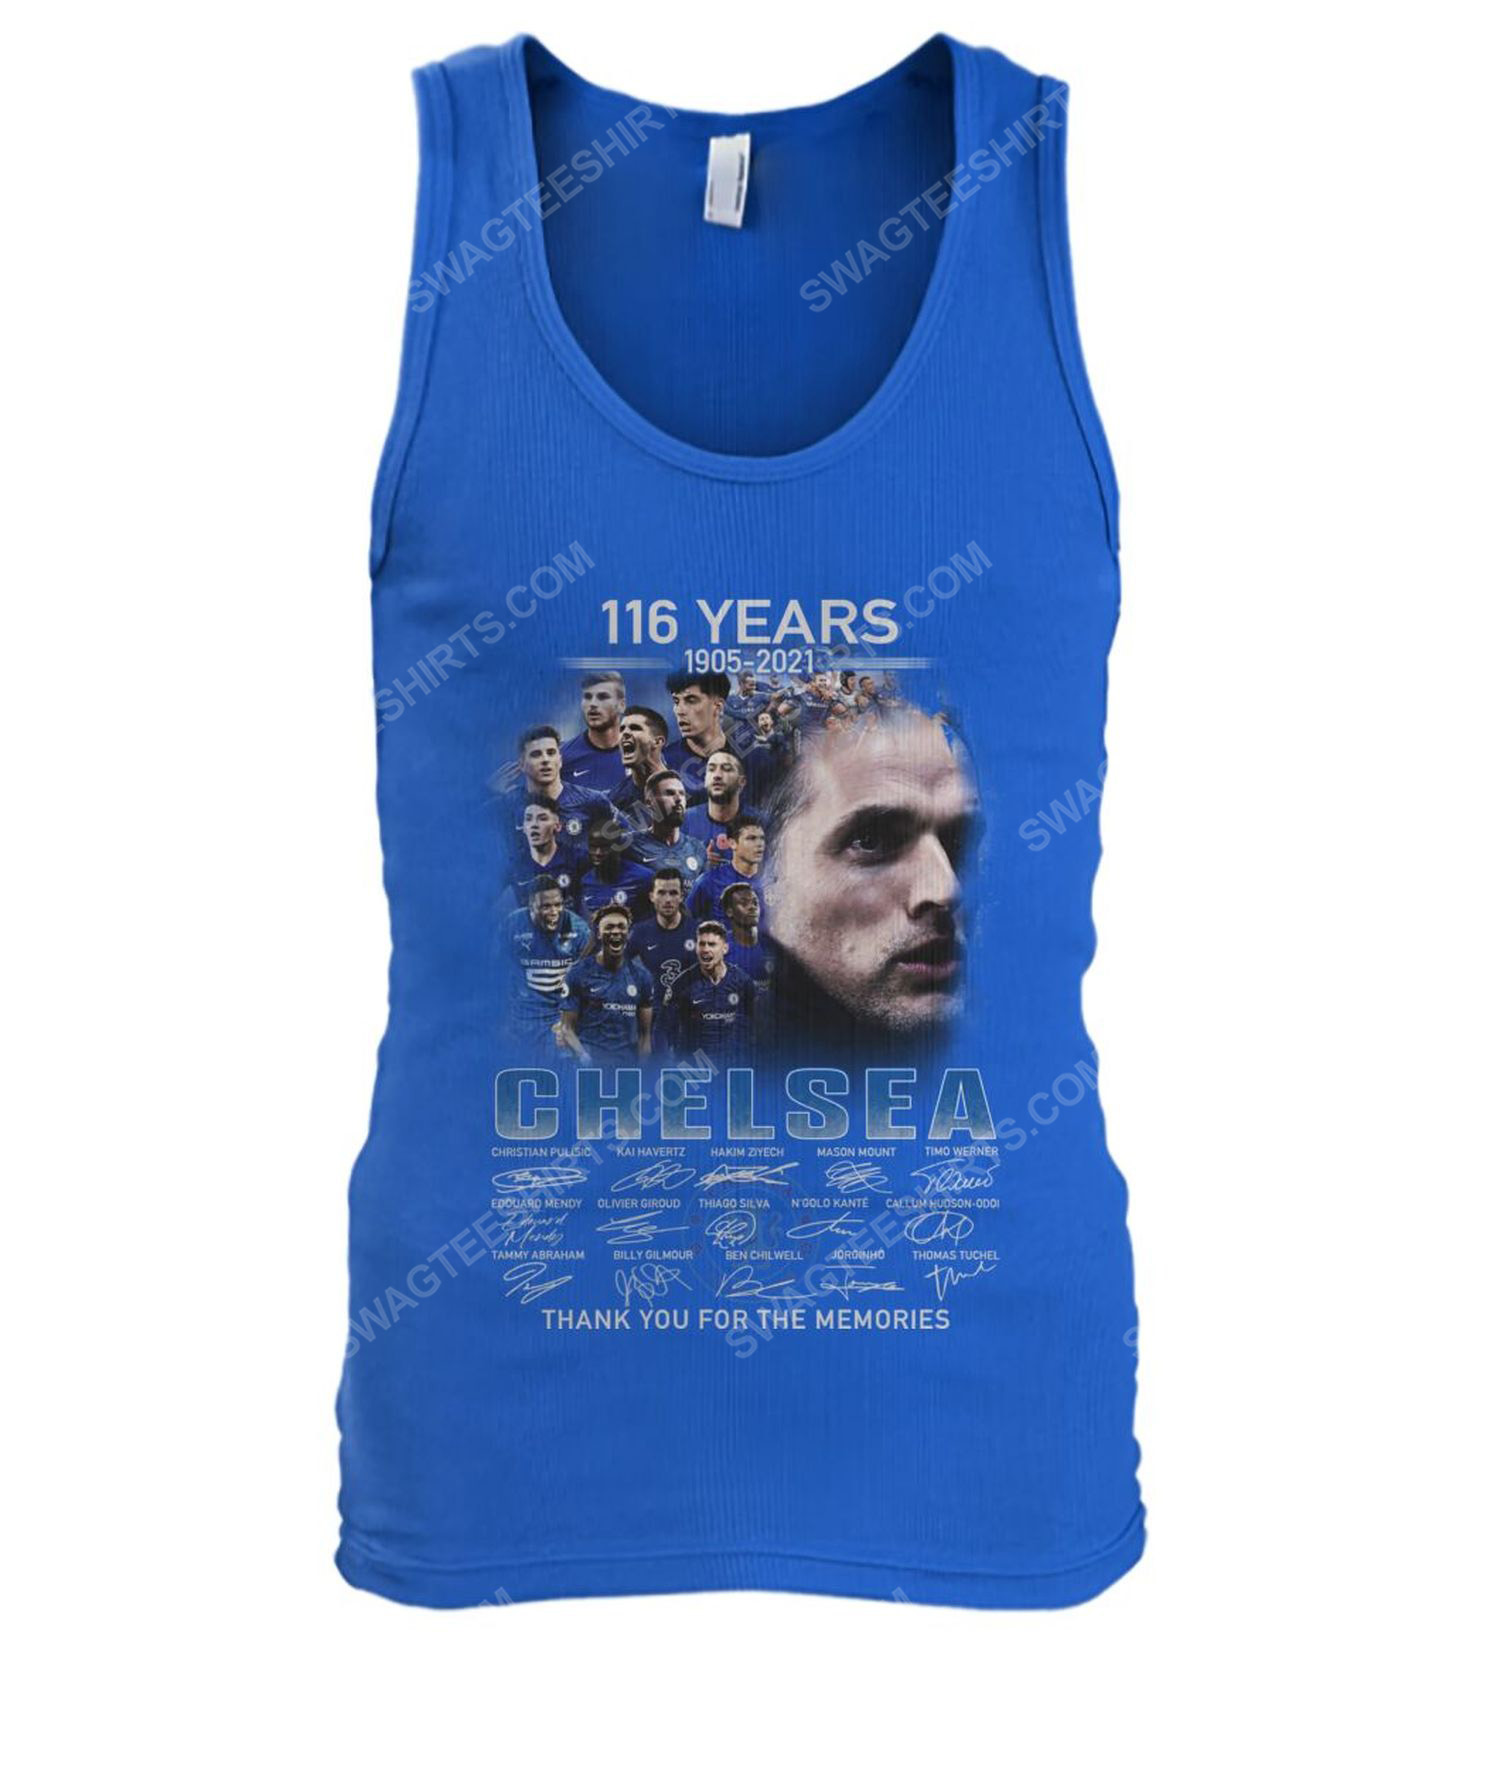 Chelsea fc thank you for the memories tank top